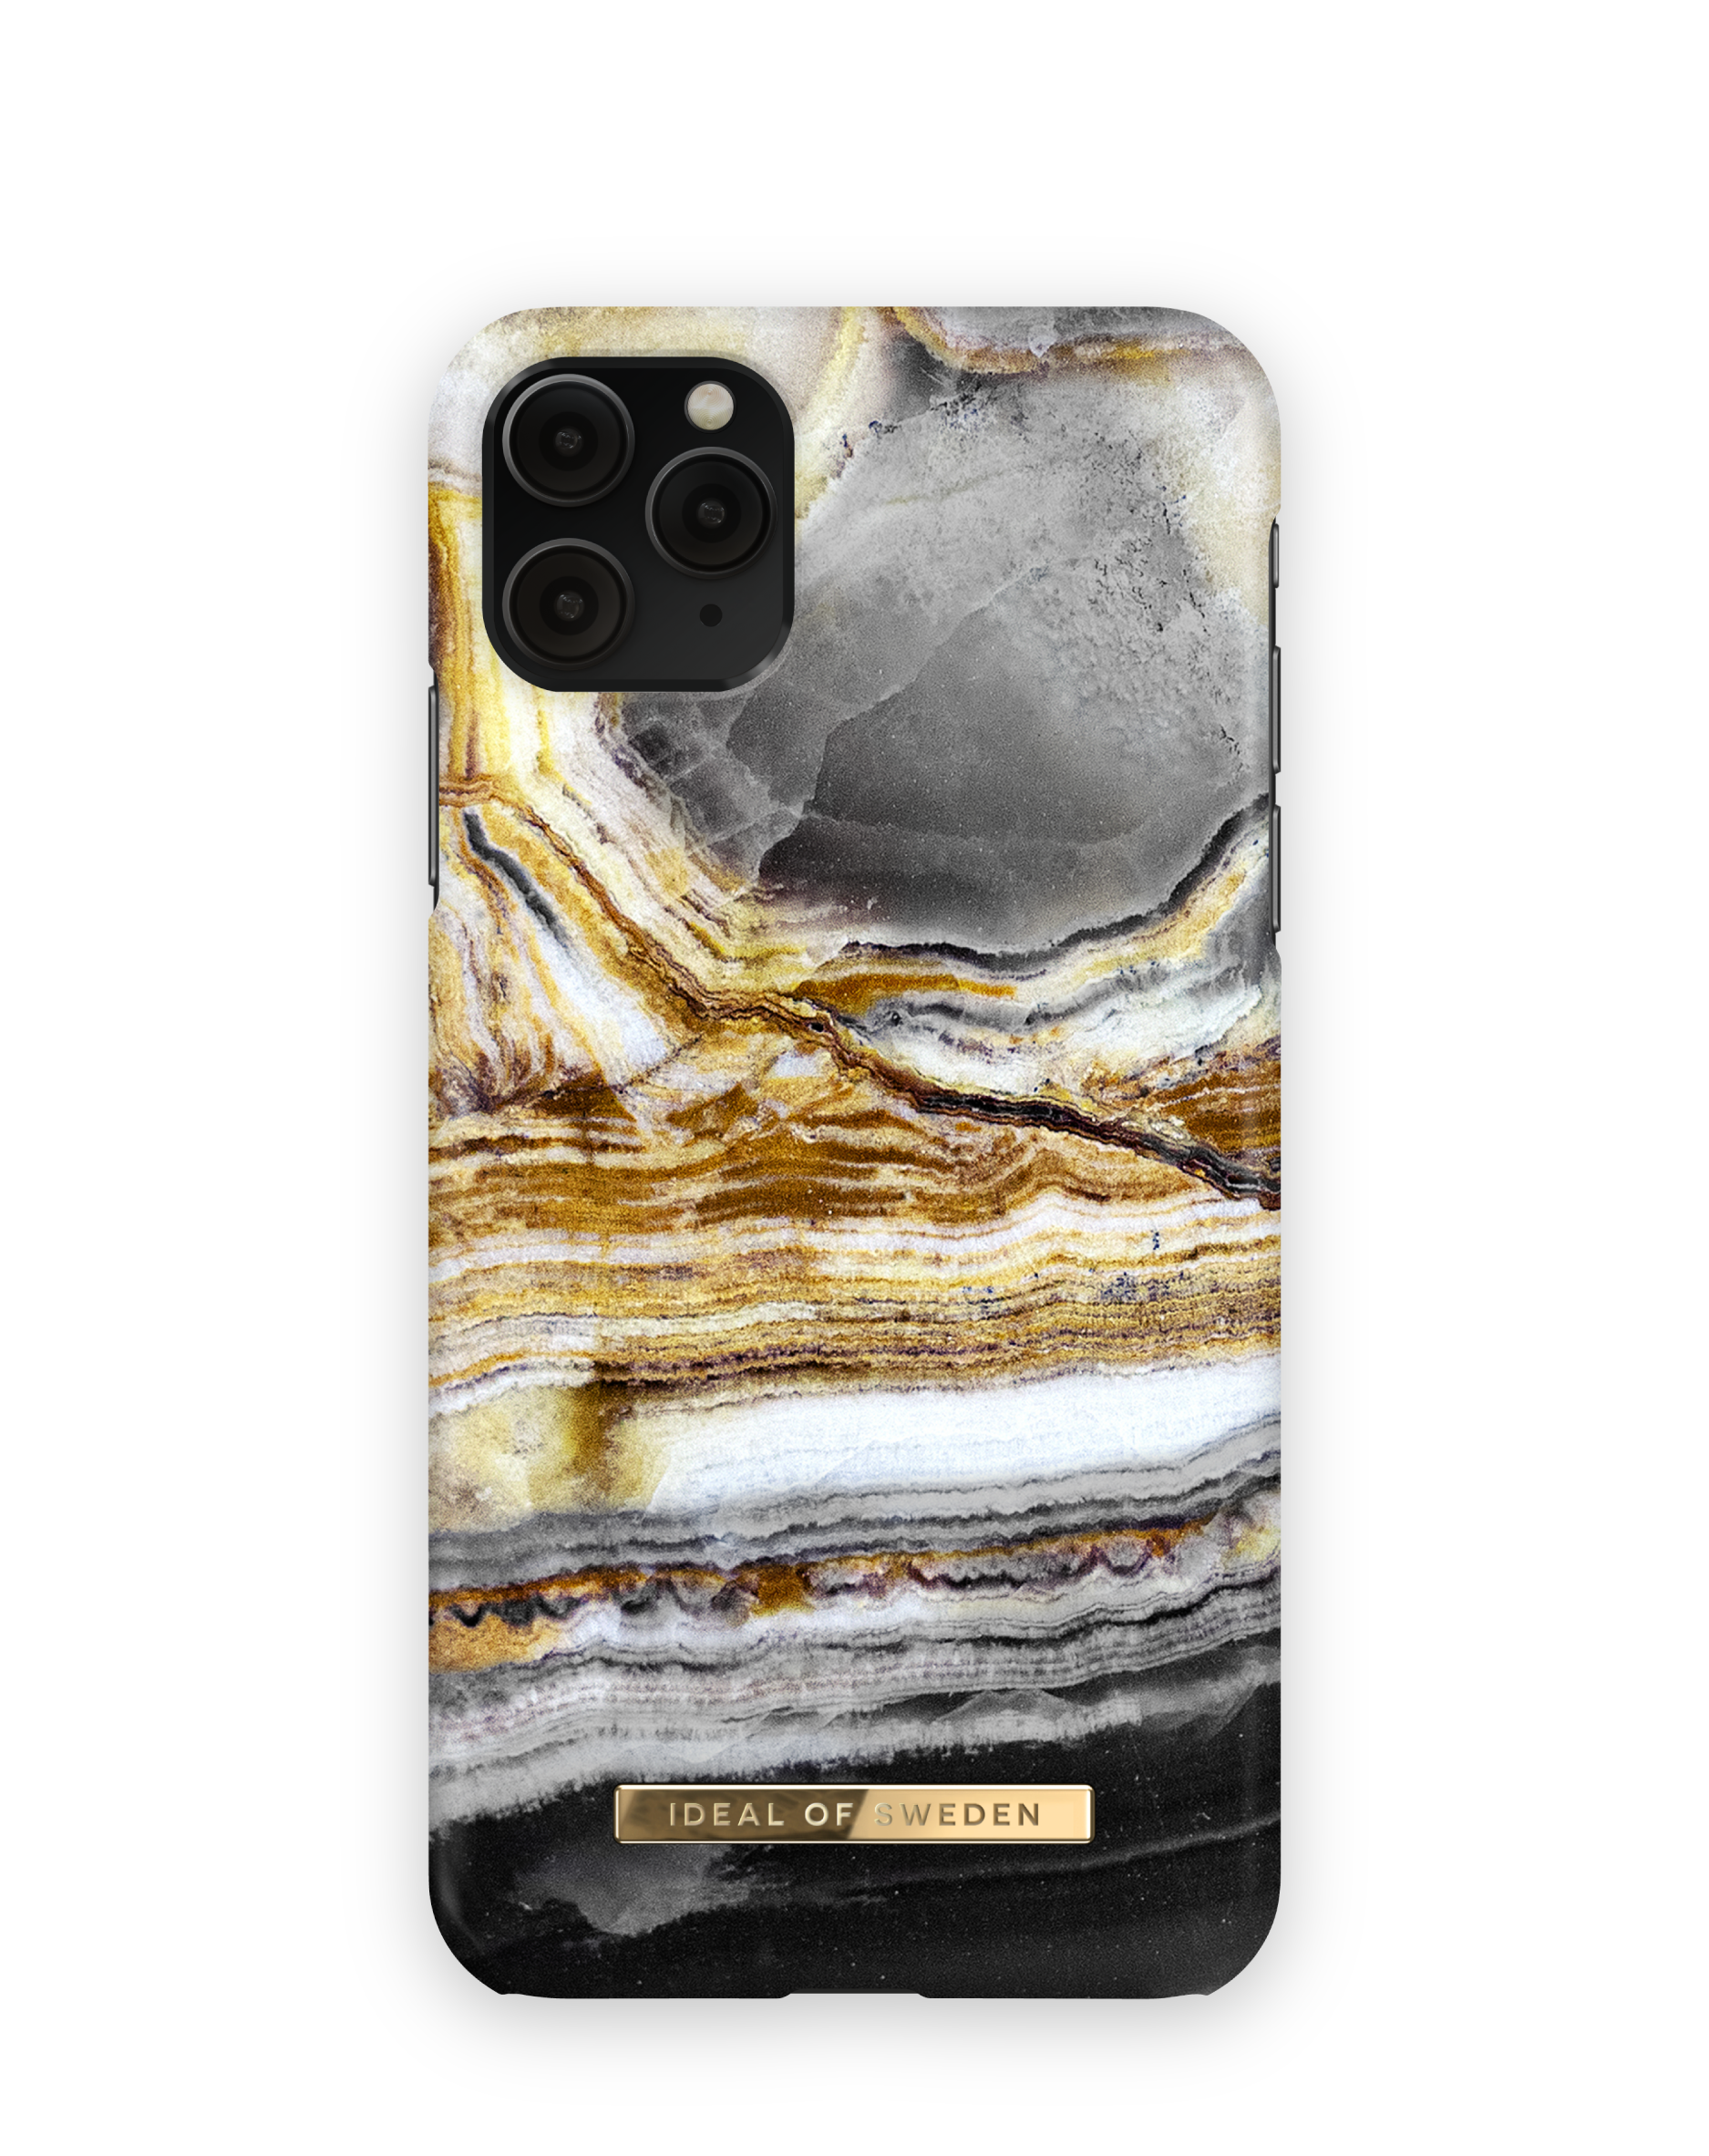 Apple Space OF Marble Apple, Max, XS IDFCAW18-I1965-99, SWEDEN Pro Apple Backcover, iPhone 11 Max, iPhone IDEAL Outer